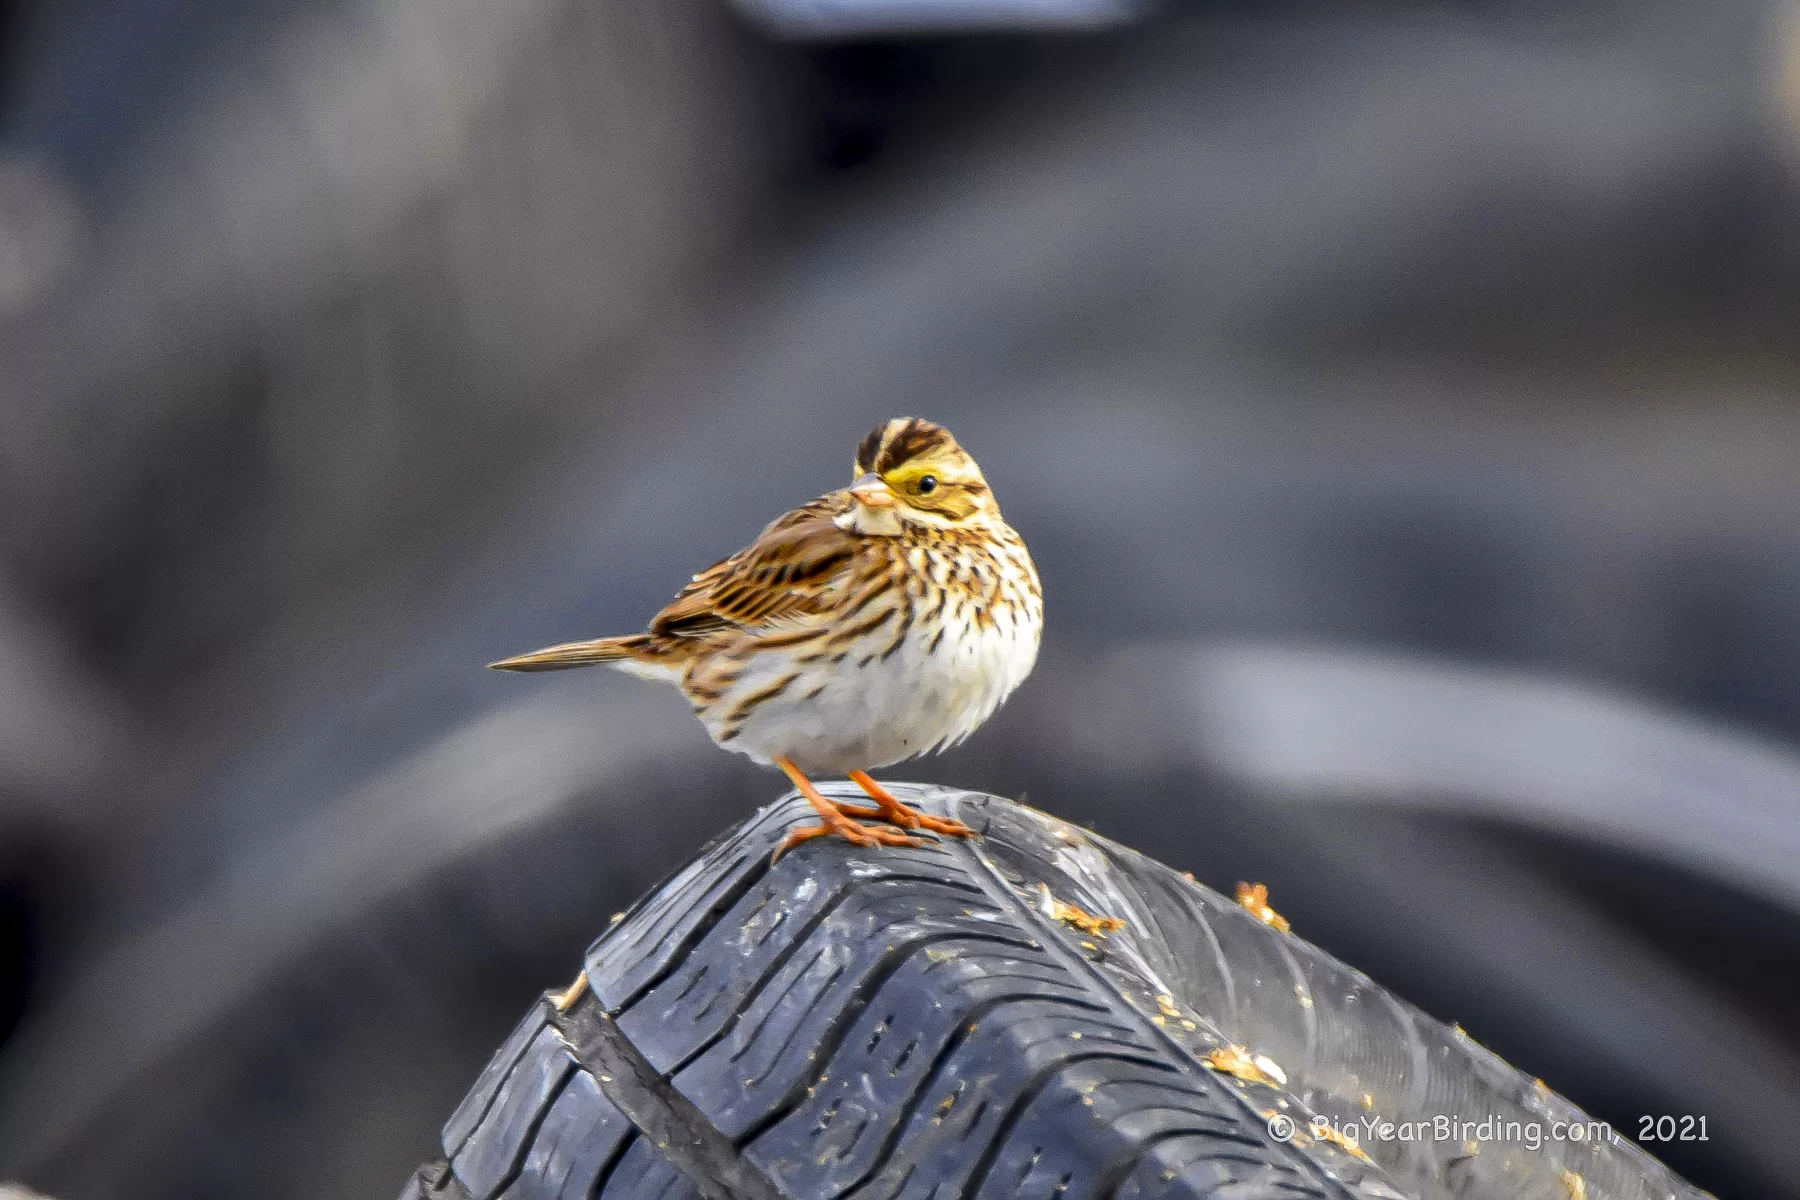 A Savannah sparrow perched atop at discarded tire, photographed by Ethan Whitaker '80 on Feb. 19, 2021.